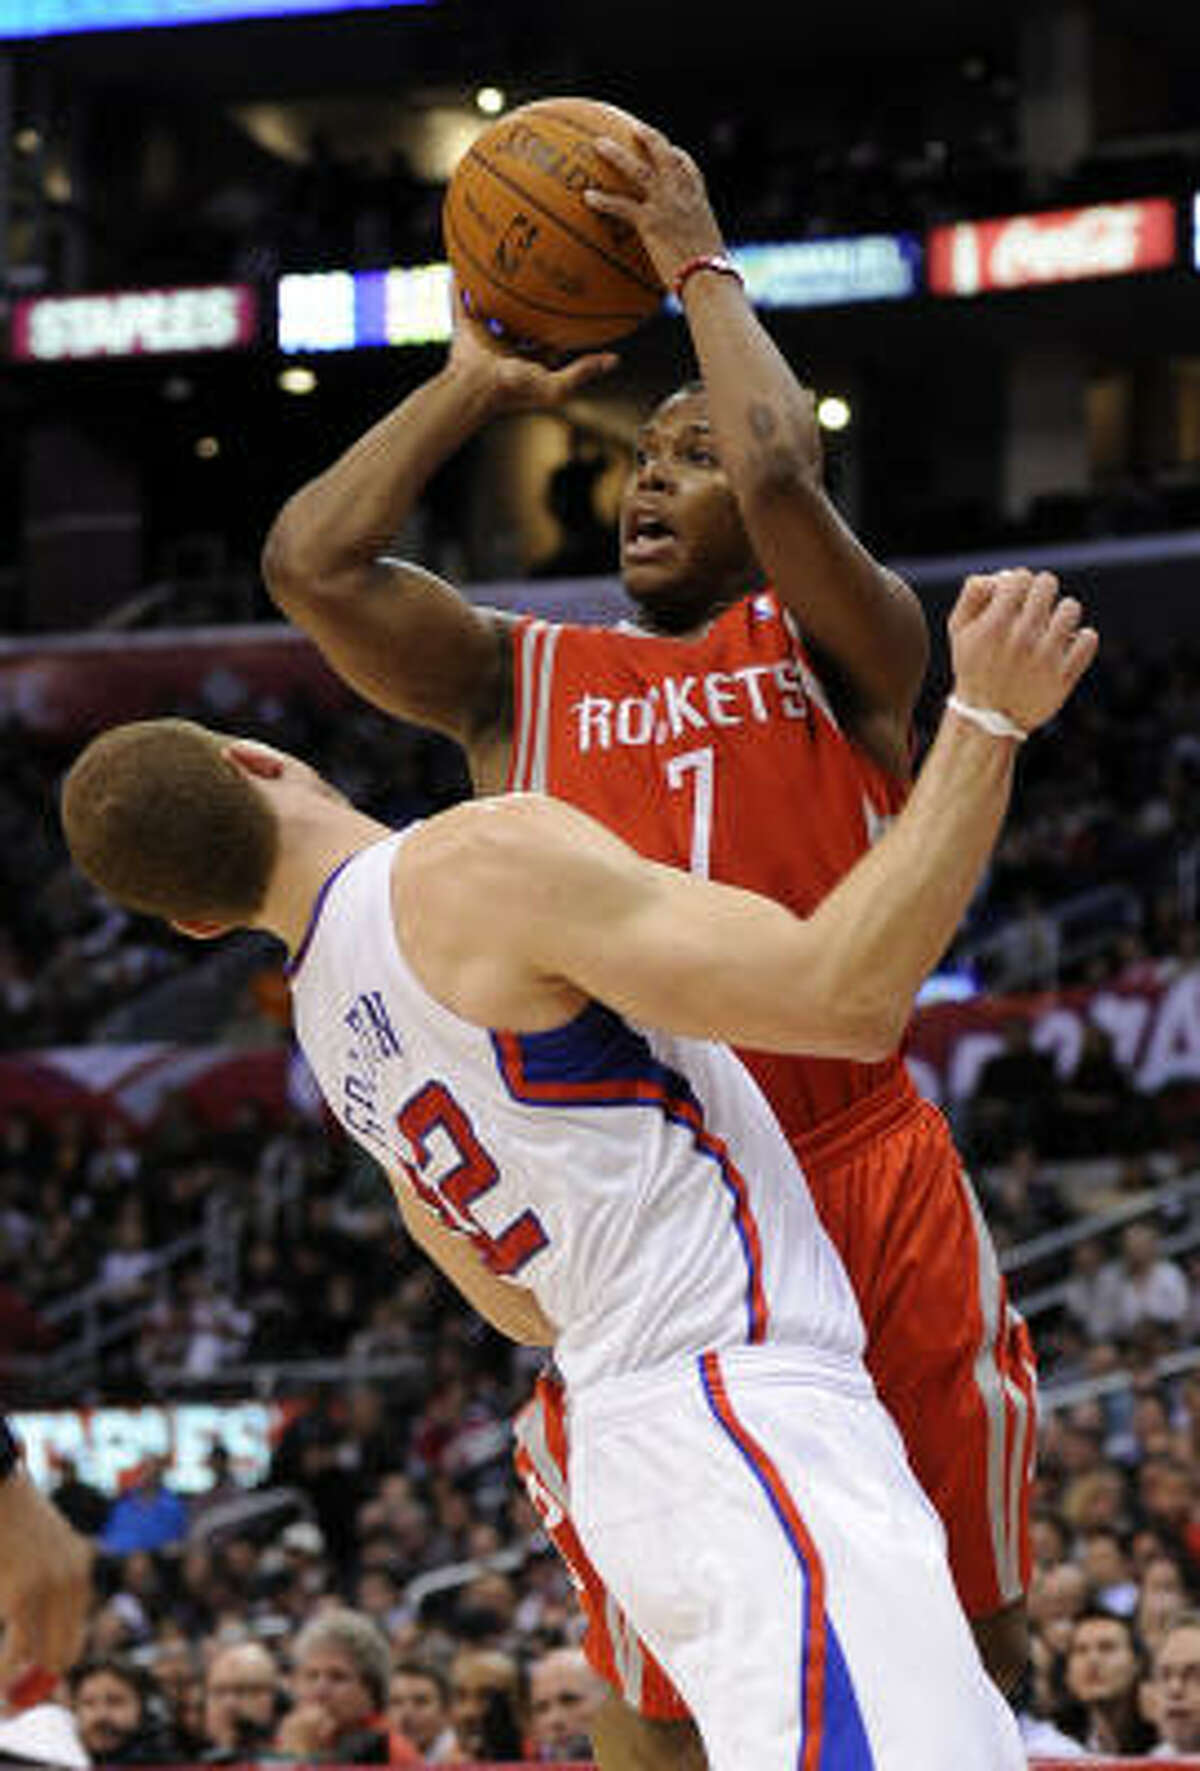 Rockets guard Kyle Lowry, right, is fouled by Clippers forward Blake Griffin as he shoots during the first half.